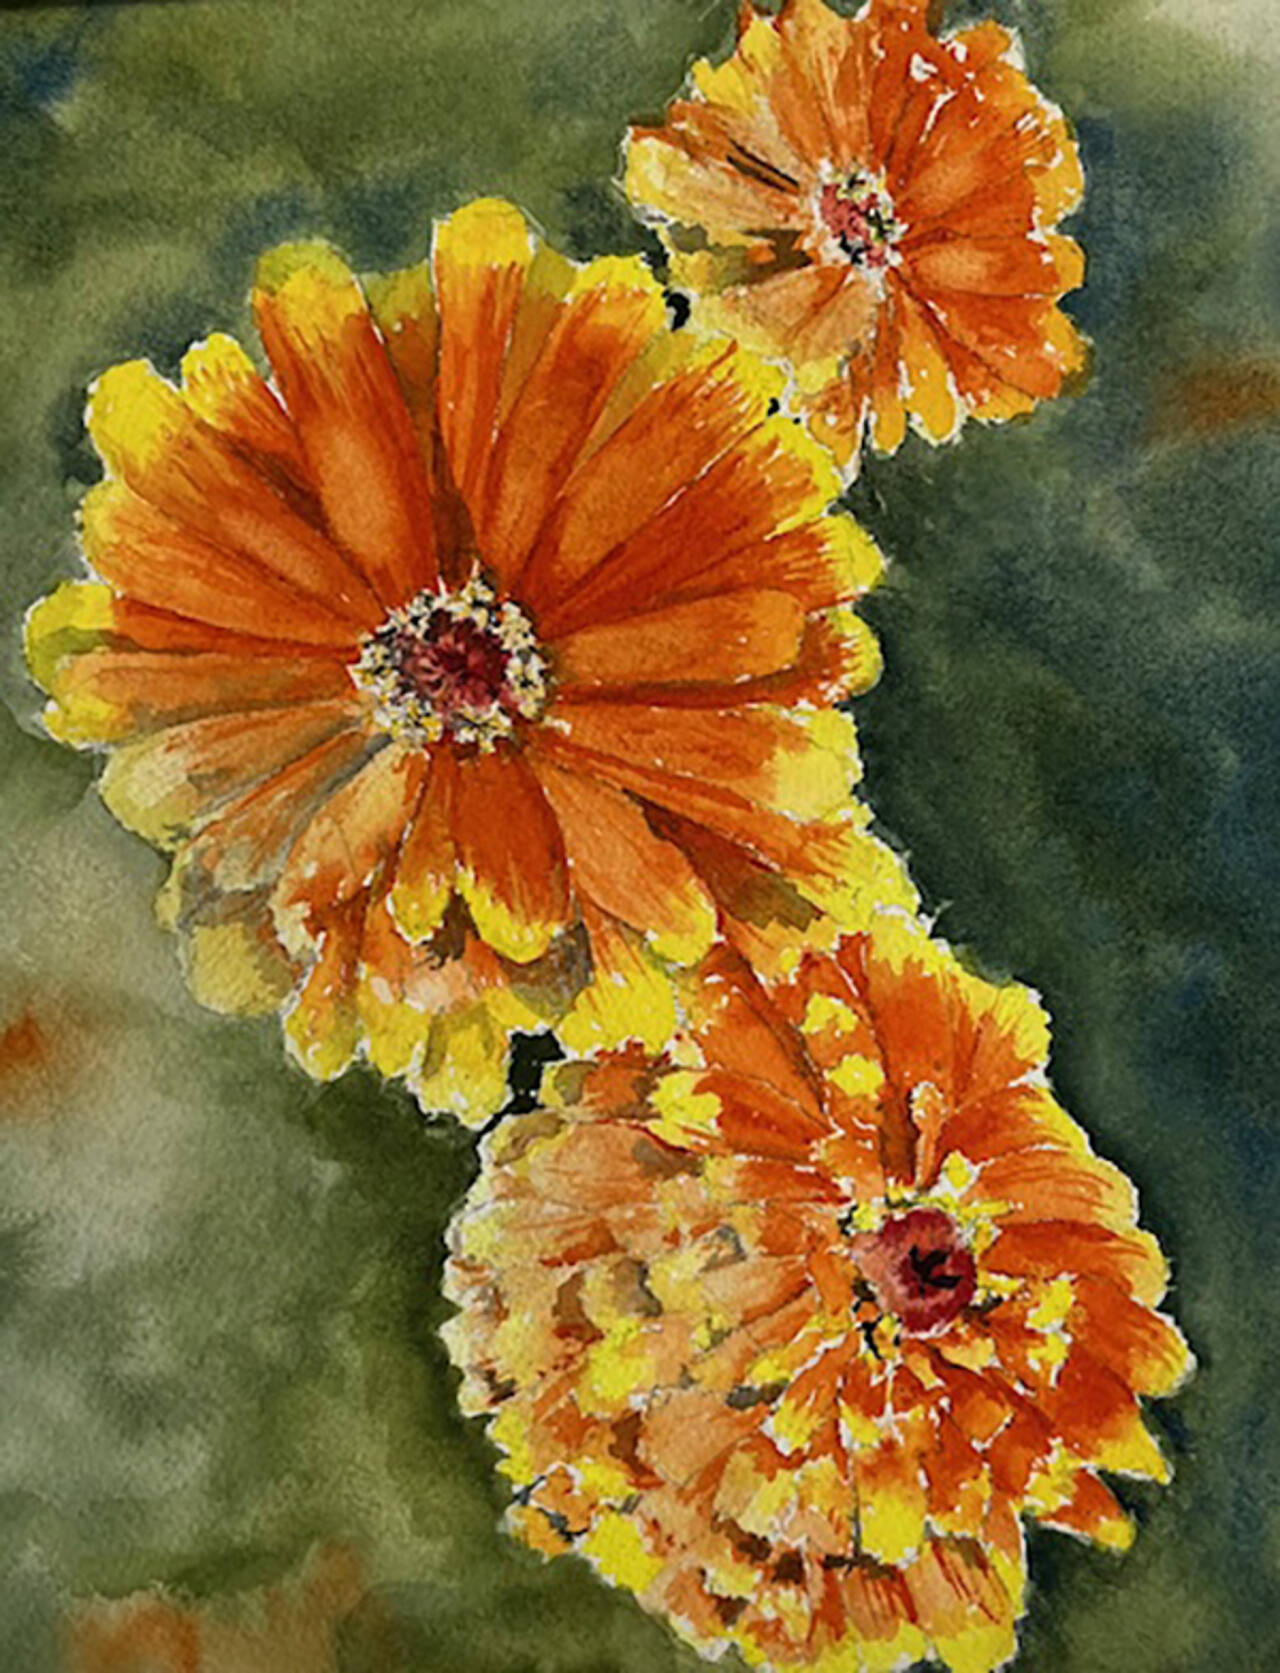 “Orange Flowers” by Mary Hiestand, a featured artist at the Blue Whole Gallery in March, will be on display during the First Friday Art Walk. (Mary Hiestand)